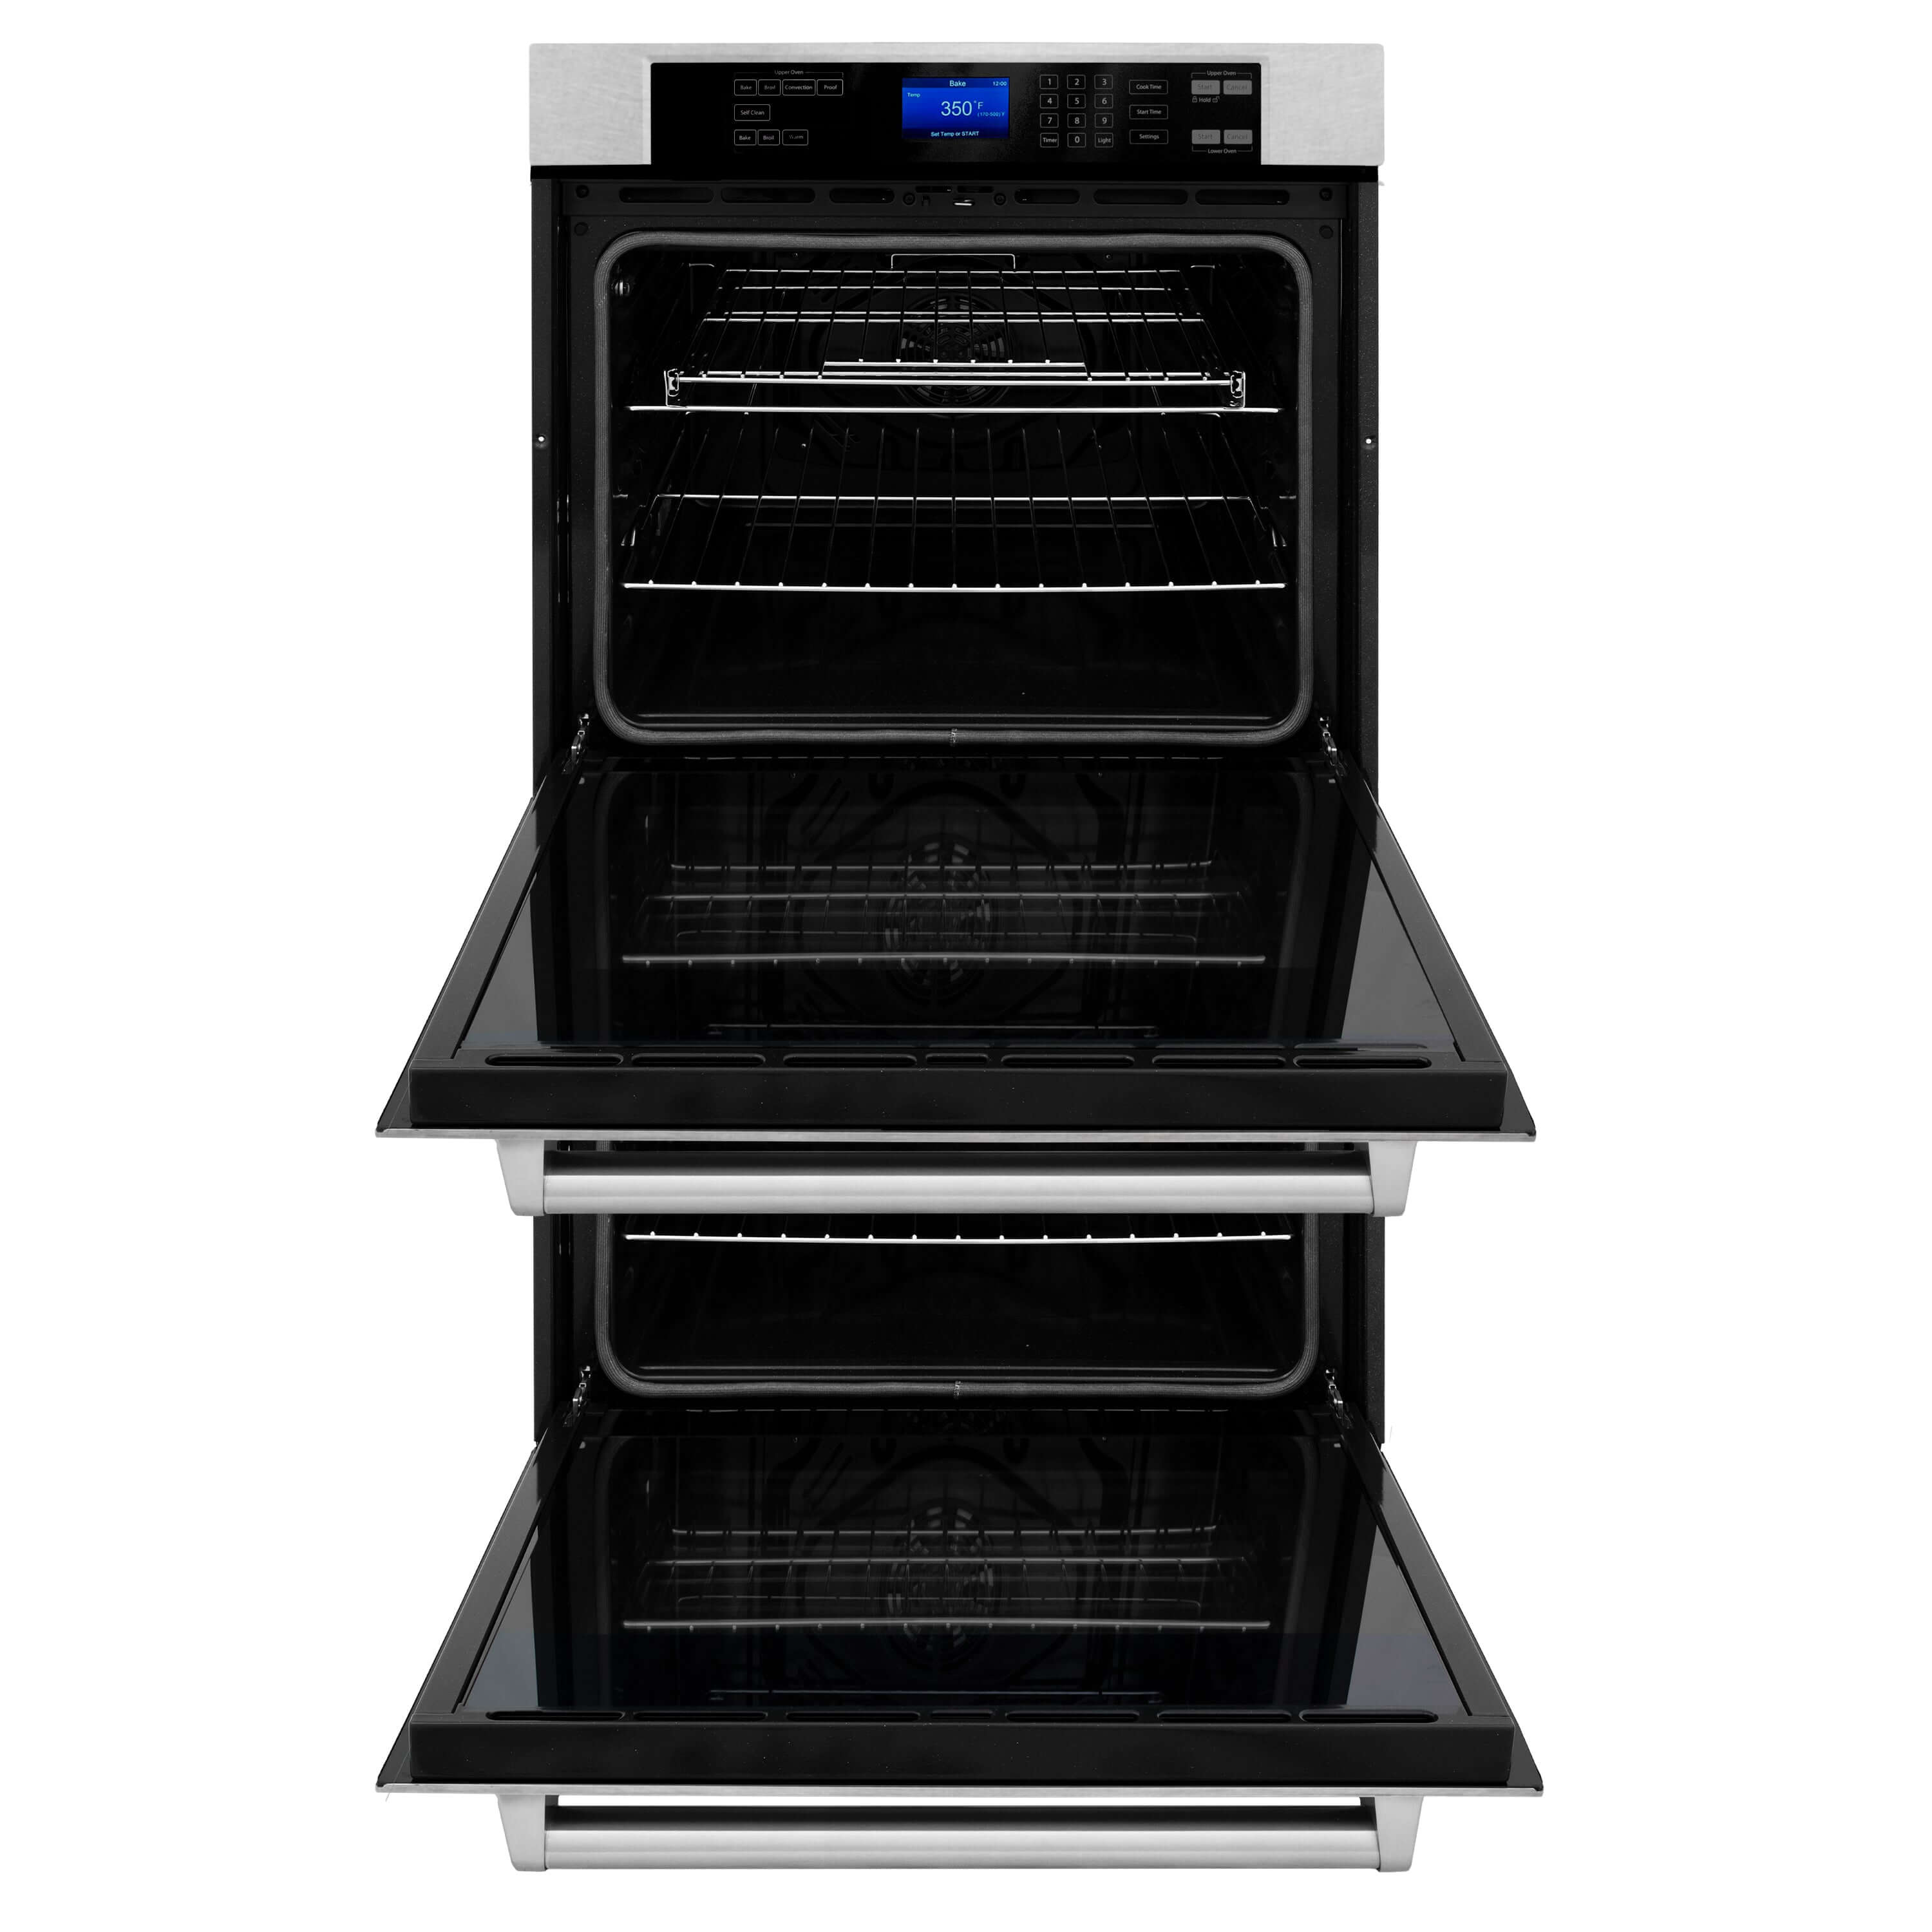 ZLINE 30 in. Professional Electric Double Wall Oven with Self Clean and True Convection in Fingerprint Resistant Stainless Steel (AWDS-30) front, oven open.